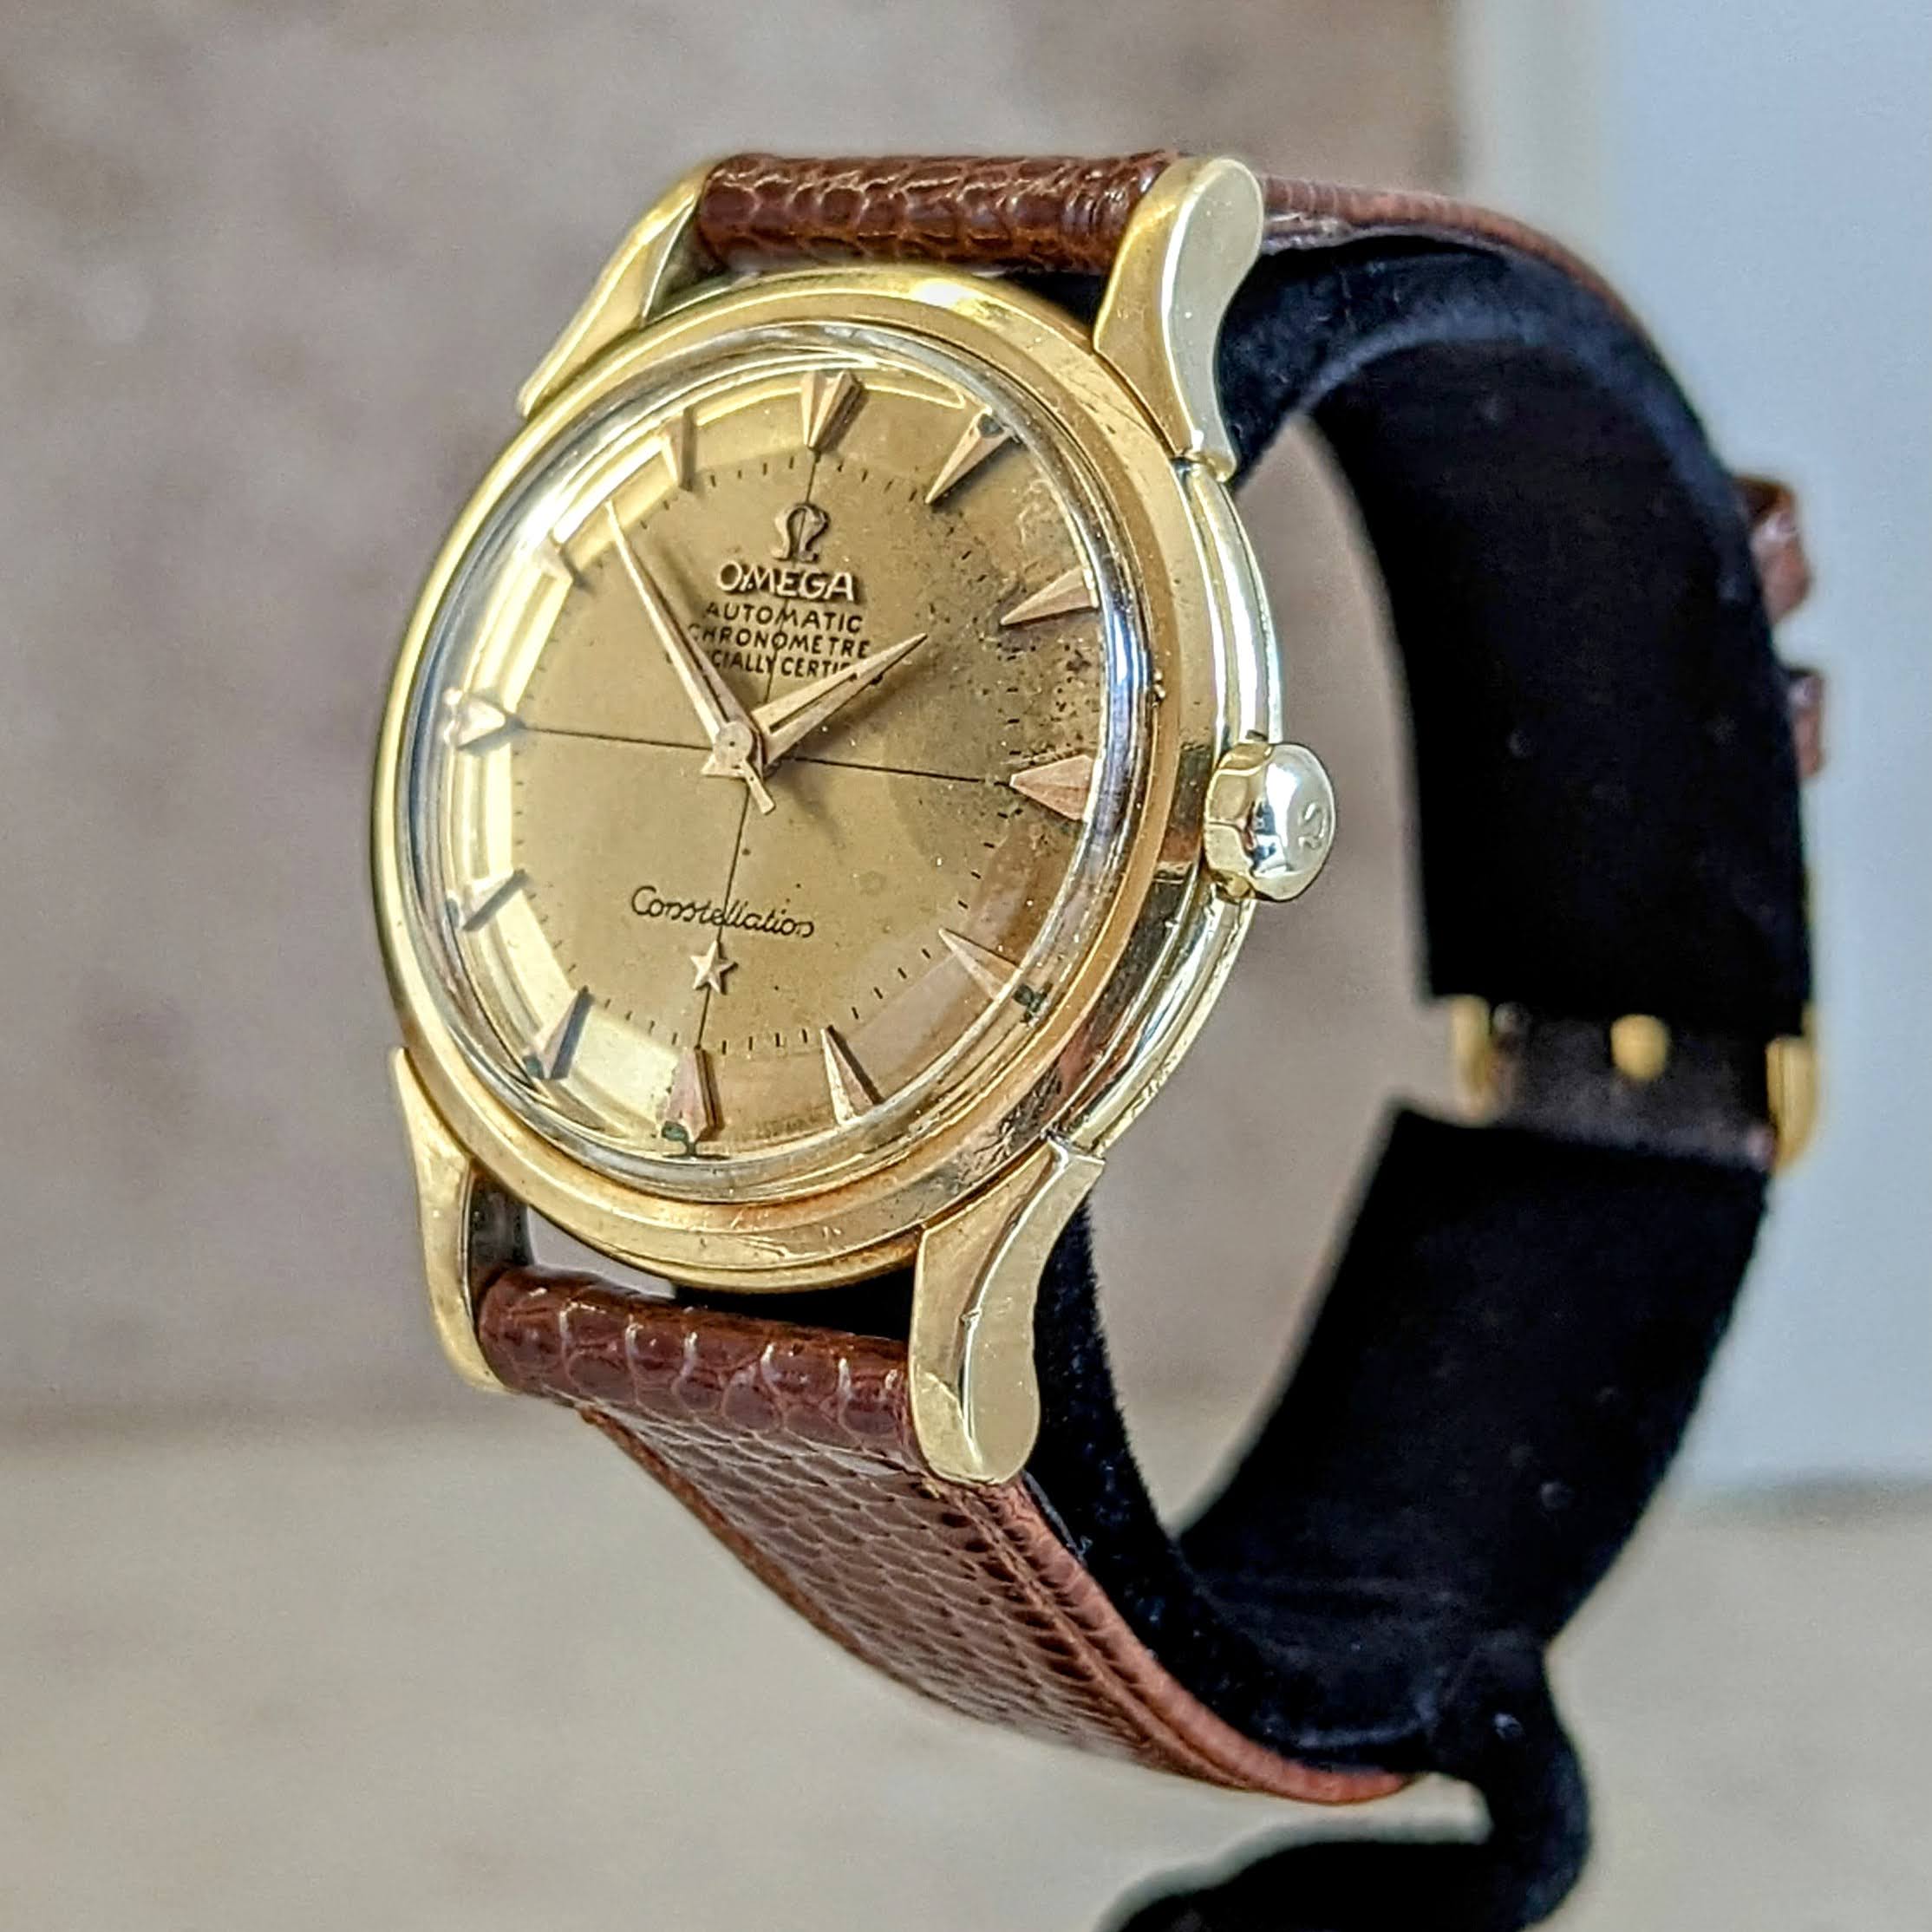 OMEGA Constellation 18K Gold Wristwatch Automatic Chronometre Officially Certified Watch Ref. 2852 2853